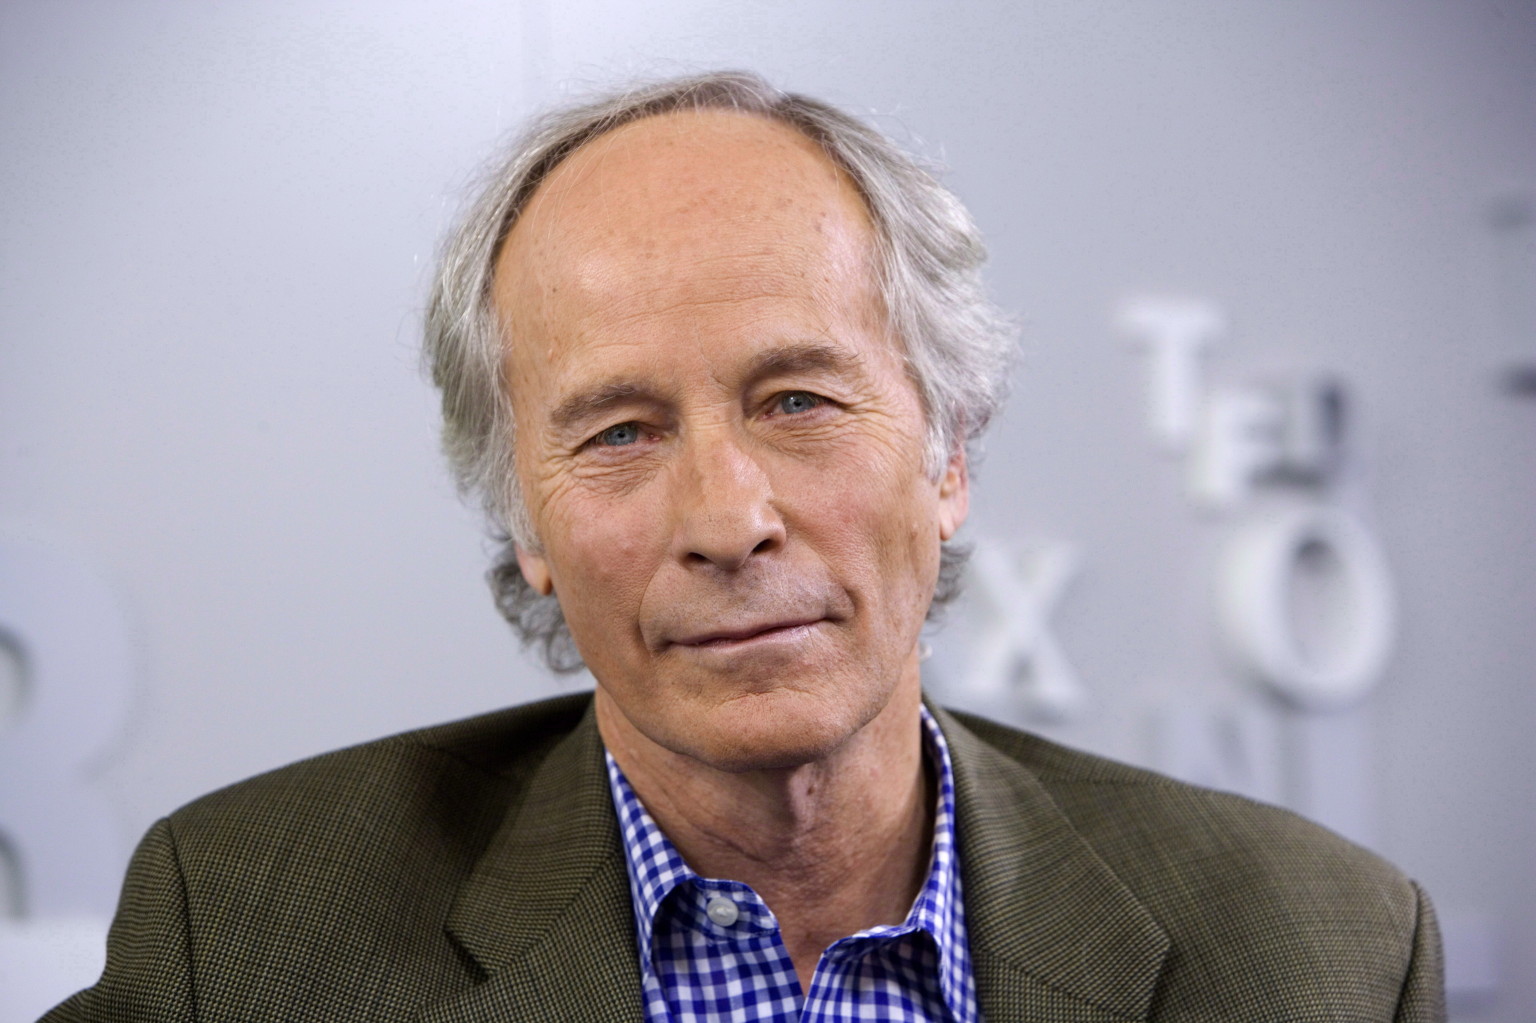 FRANKFURT AM MAIN, GERMANY - OCTOBER 11: Richard Ford, American writer, on October 11, 2012 in Frankfurt am Main, Germany. The Frankfurt Book Fair is the largest in the world and will run from October 10 to October 14, 2012. (Photo by Ulrich Baumgarten via Getty Images)